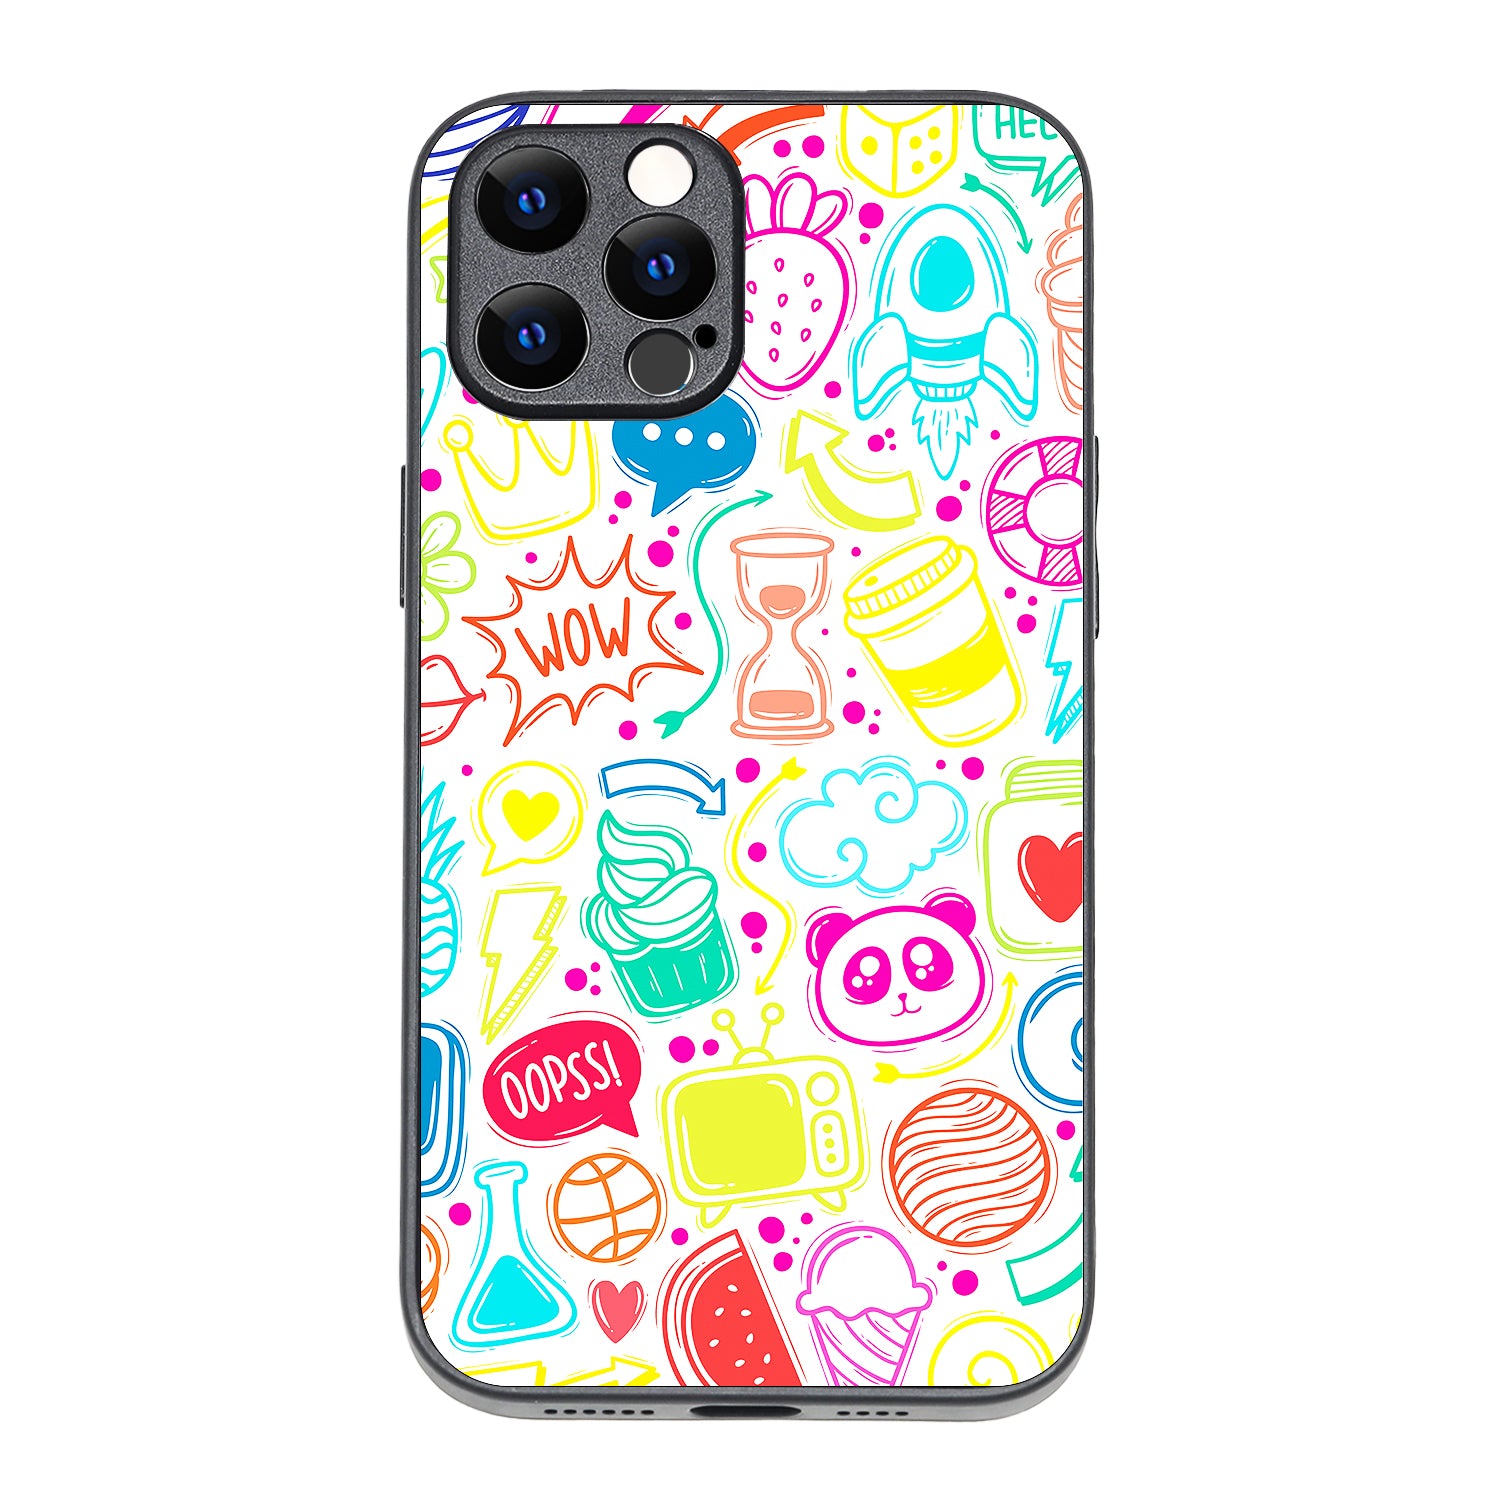 Wow Doodle iPhone 12 Pro Max Case